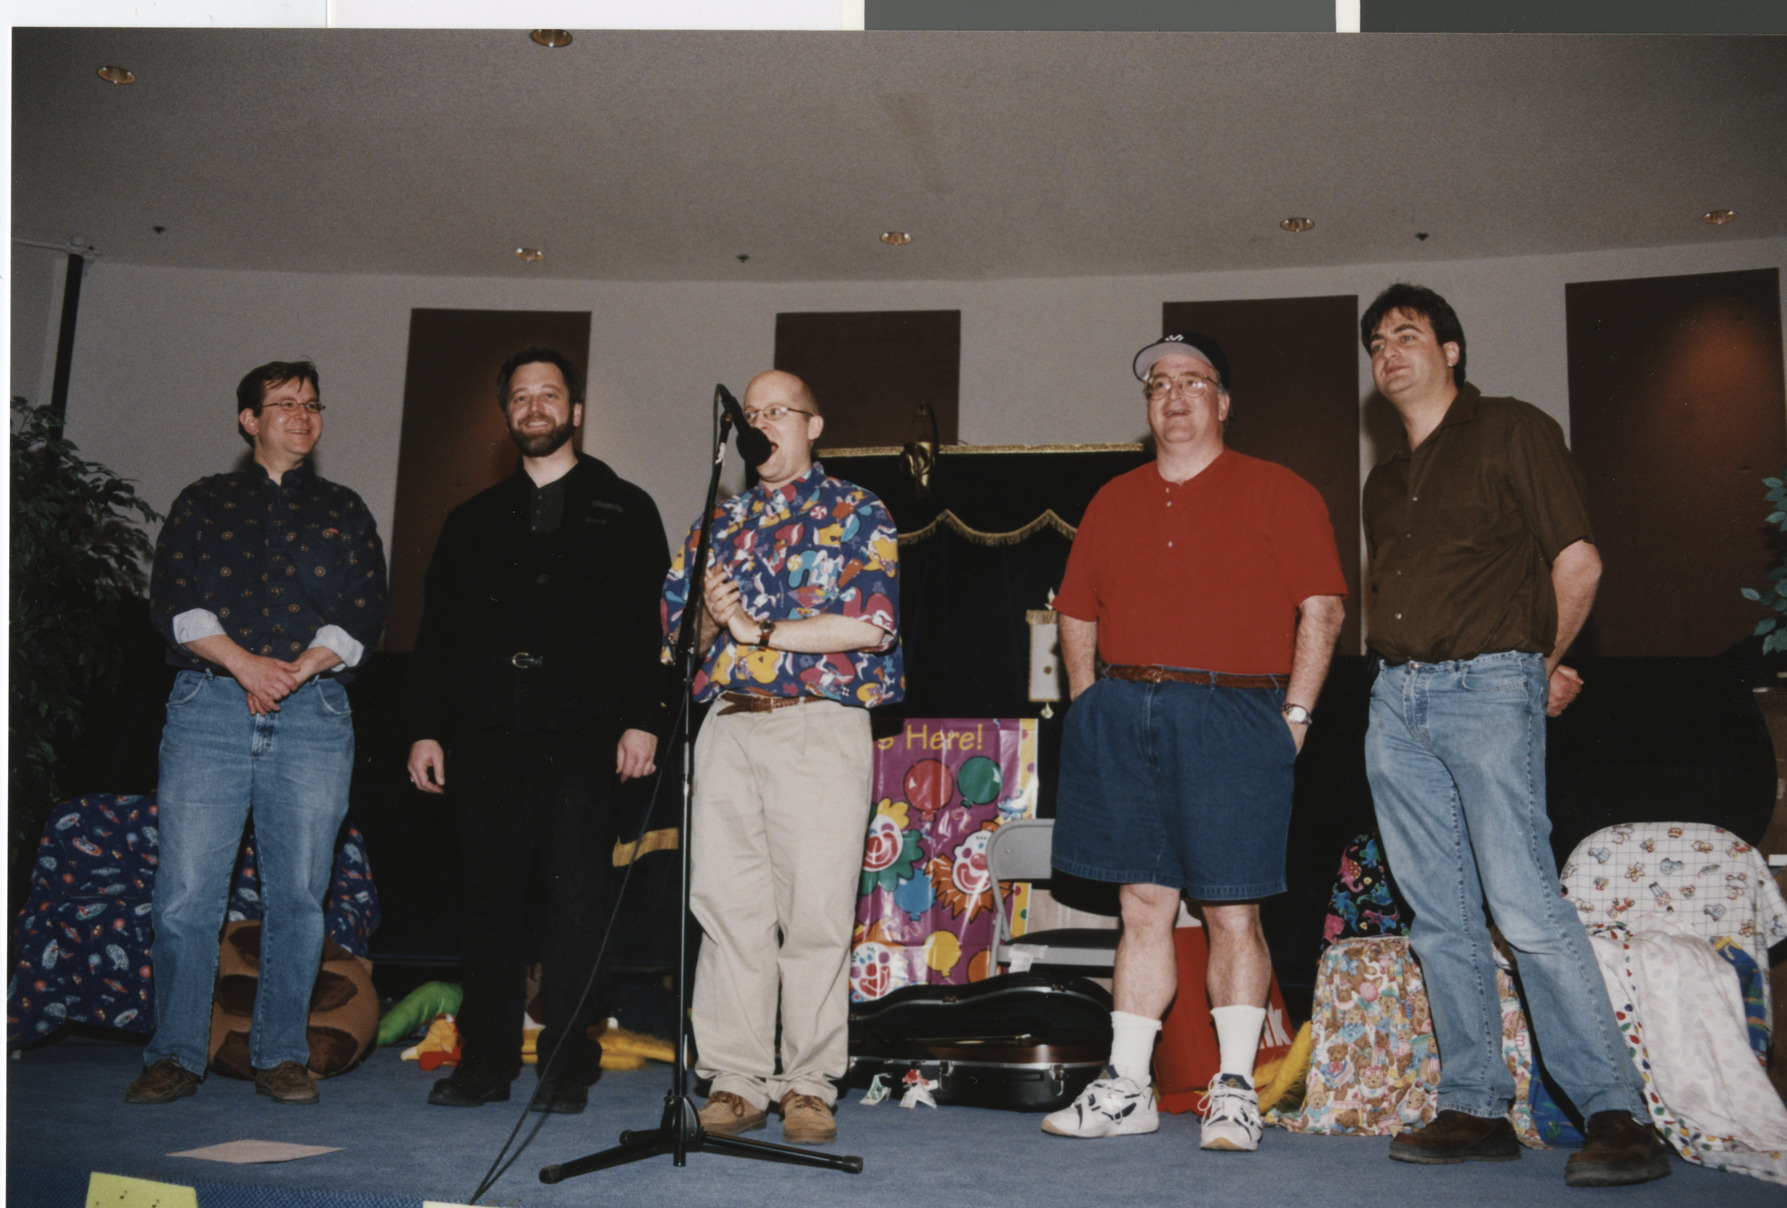 Photograph of men on a stage, 1990s